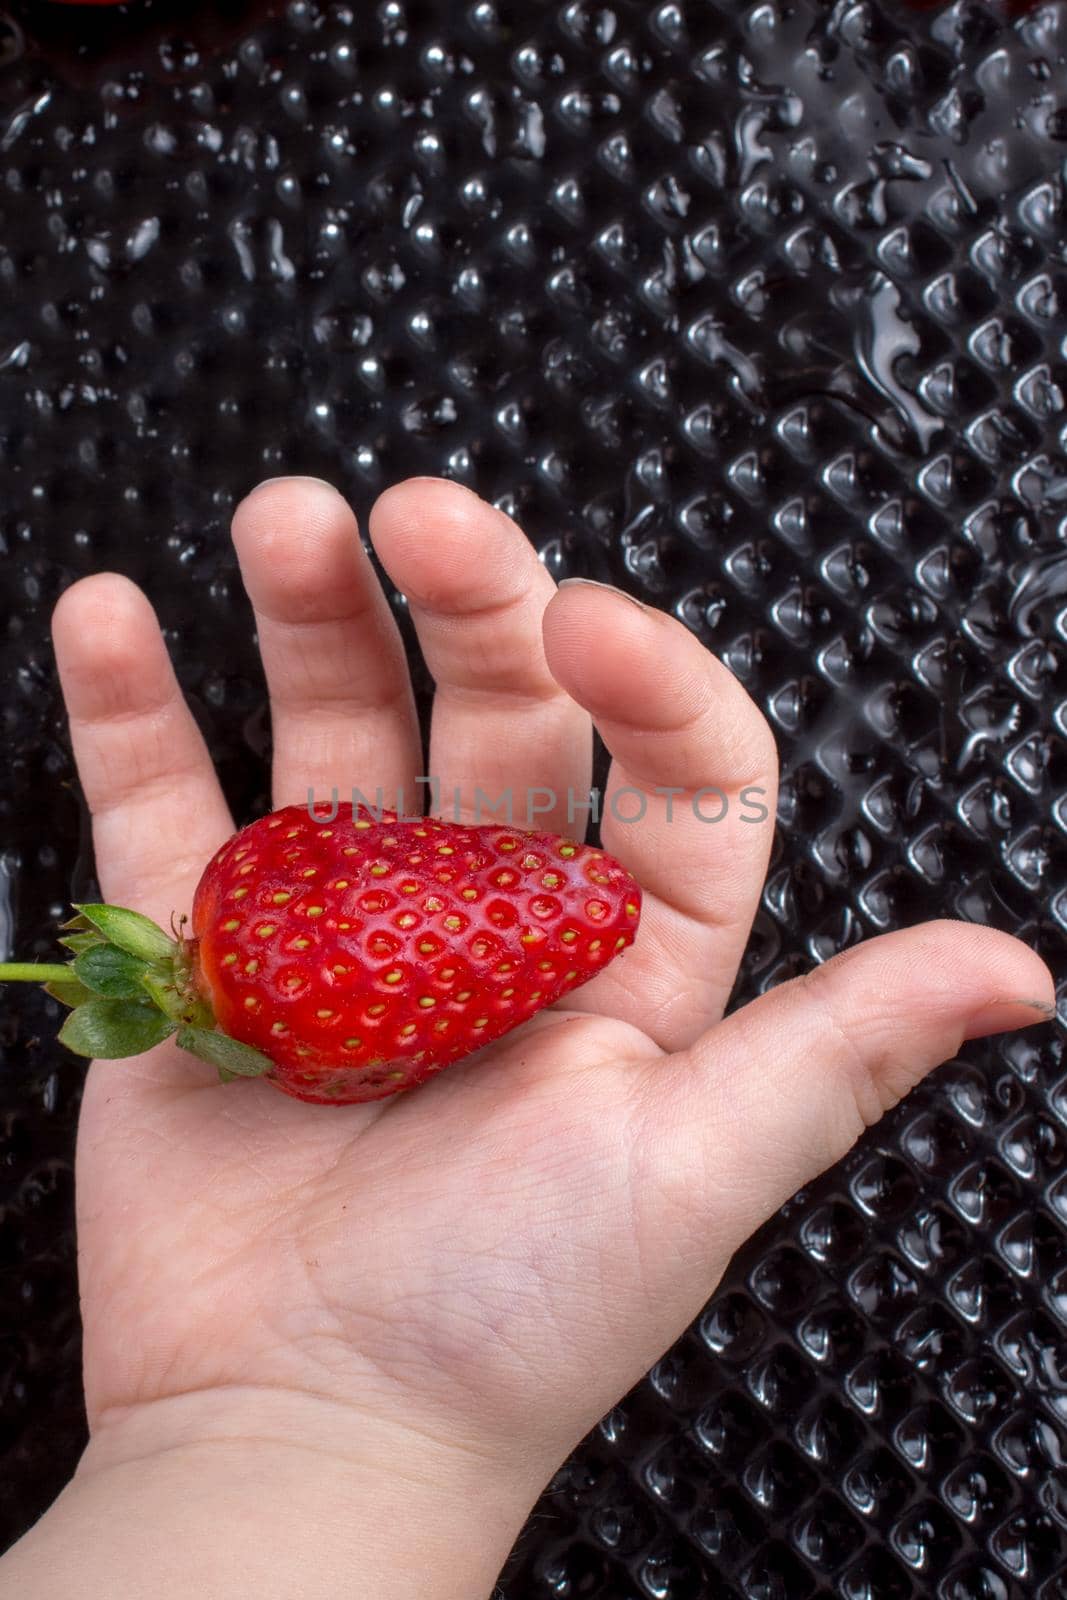 Juicy, sweet and ripe strawberry fruit in hand